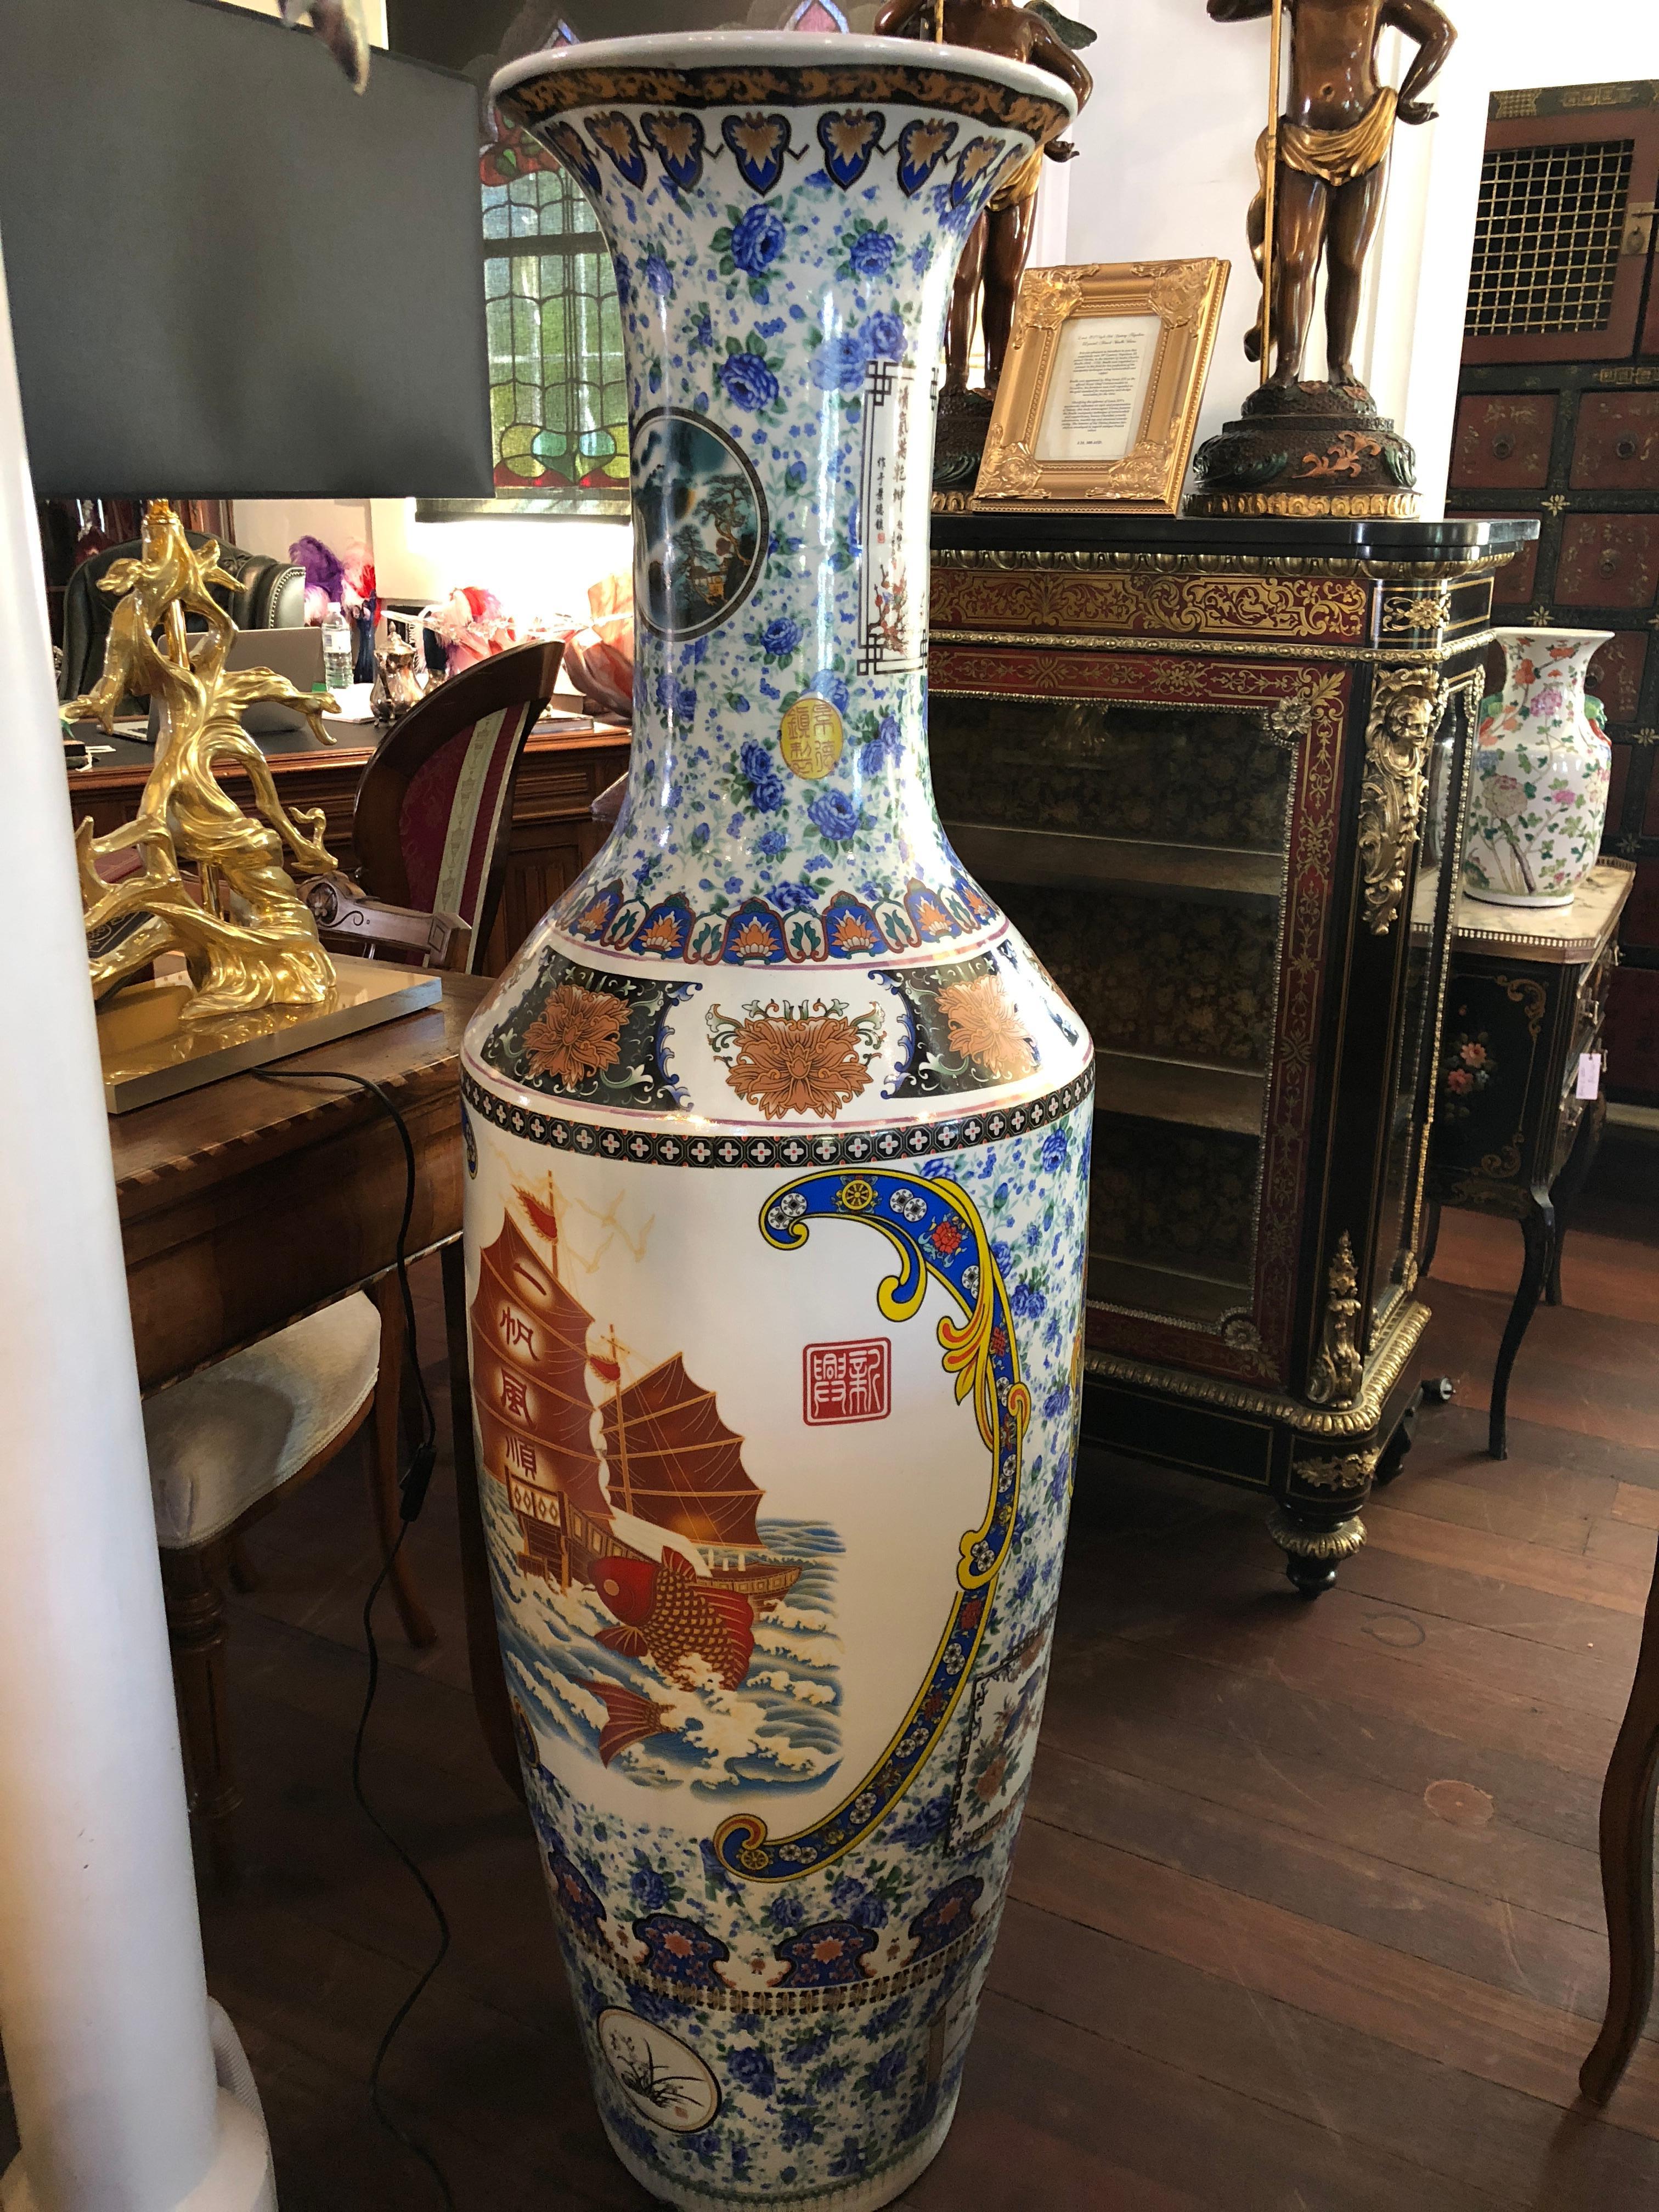 This grand Chinese floor vase is adorned with beautiful, hand painted depictions of flowers and traditional Chinese symbols such as dragon boats and koi fish. Toward the top lip of this grand vase, there are small panels of Chinese calligraphy,